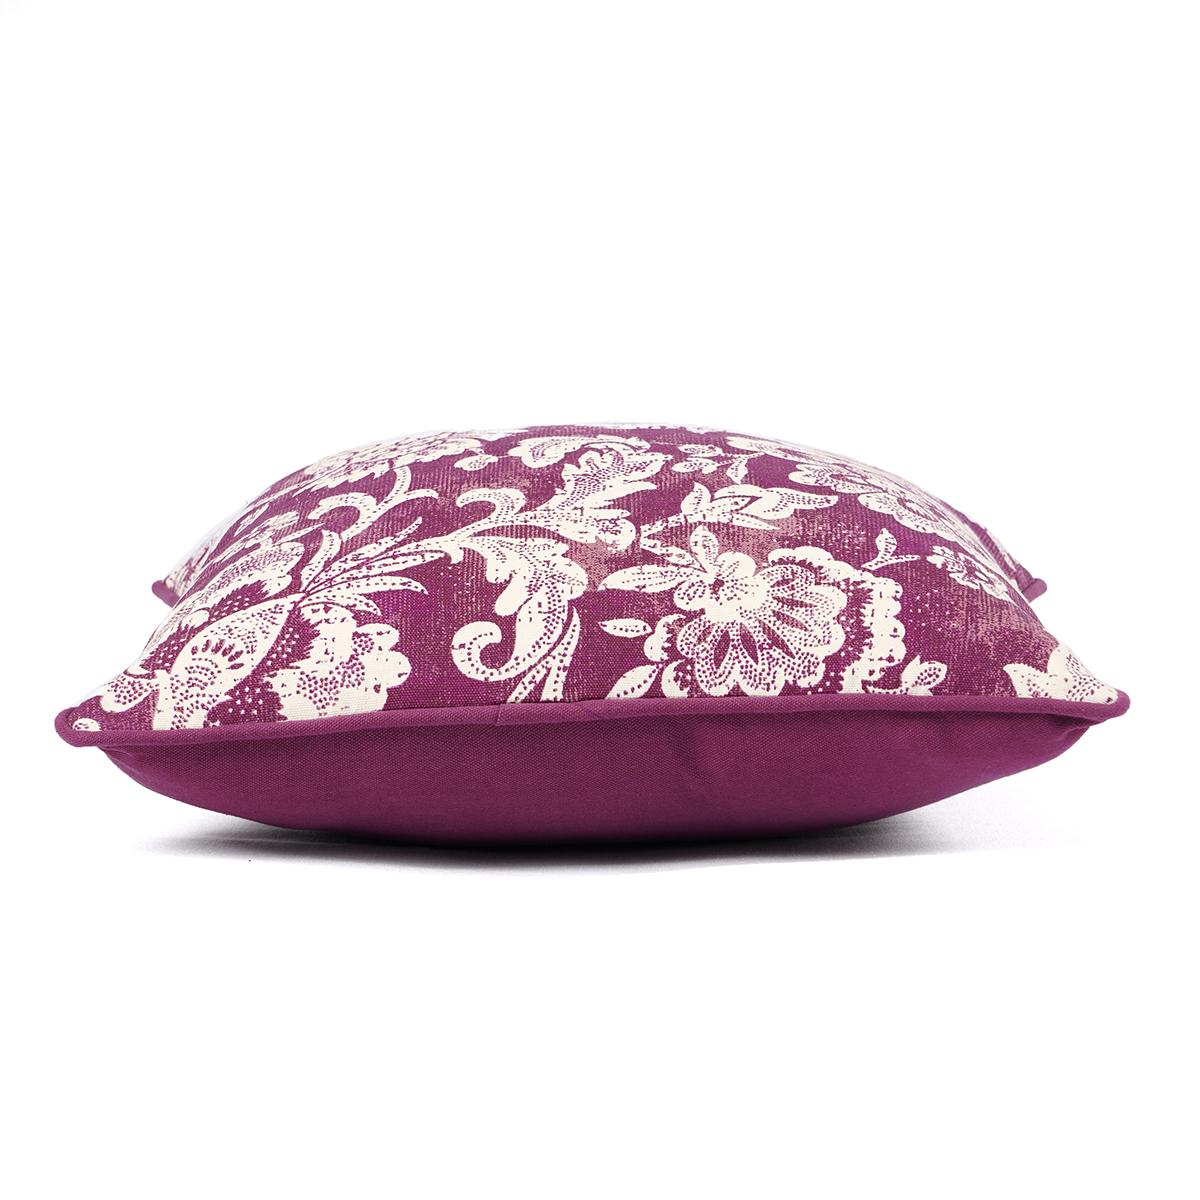 Plum DOMINOTERIE bold floral print cotton pillow cover, sizes available